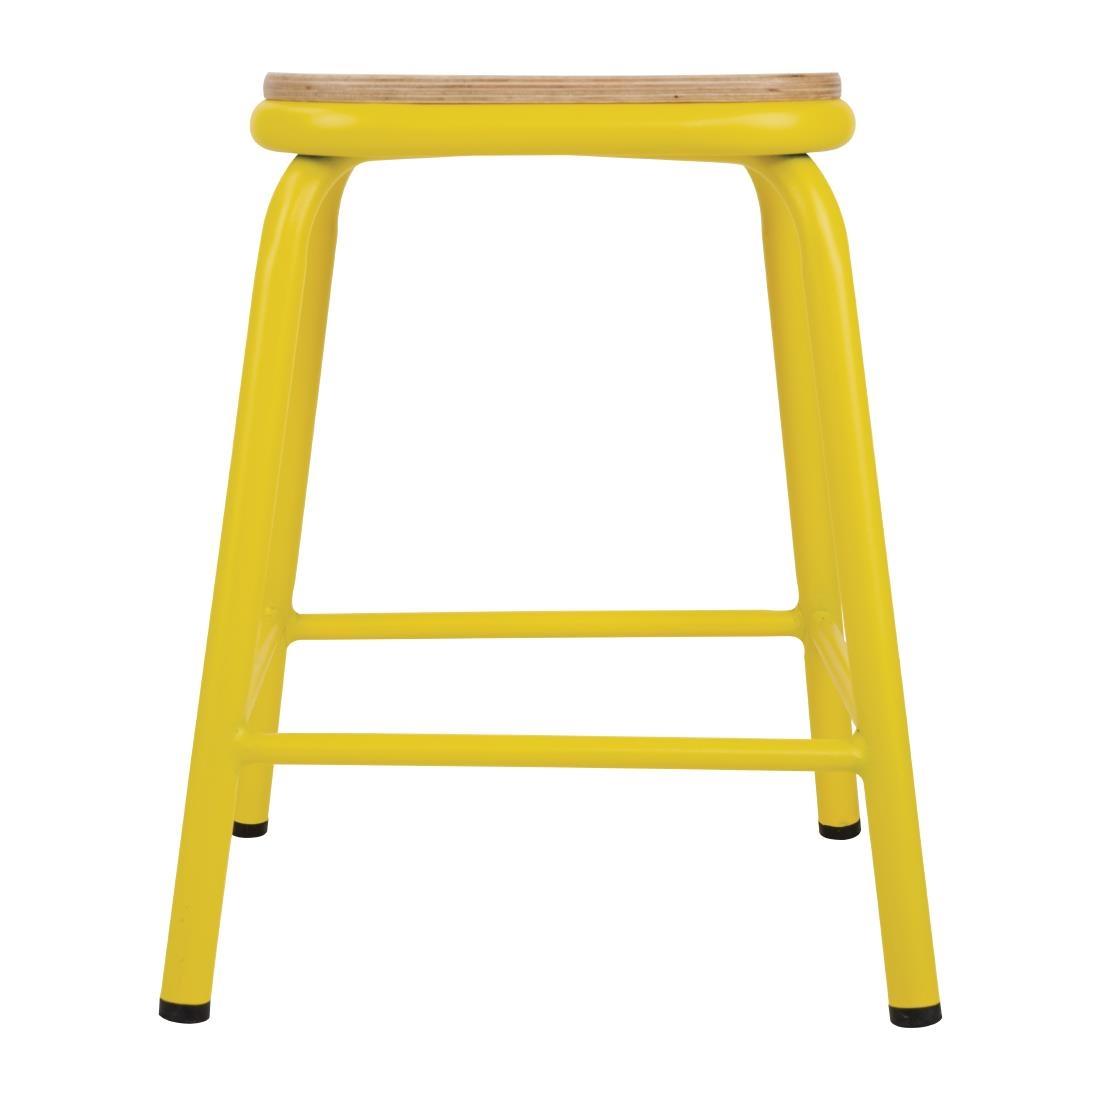 Bolero Cantina Low Stools with Wooden Seat Pad Yellow (Pack of 4) - FB935  - 2